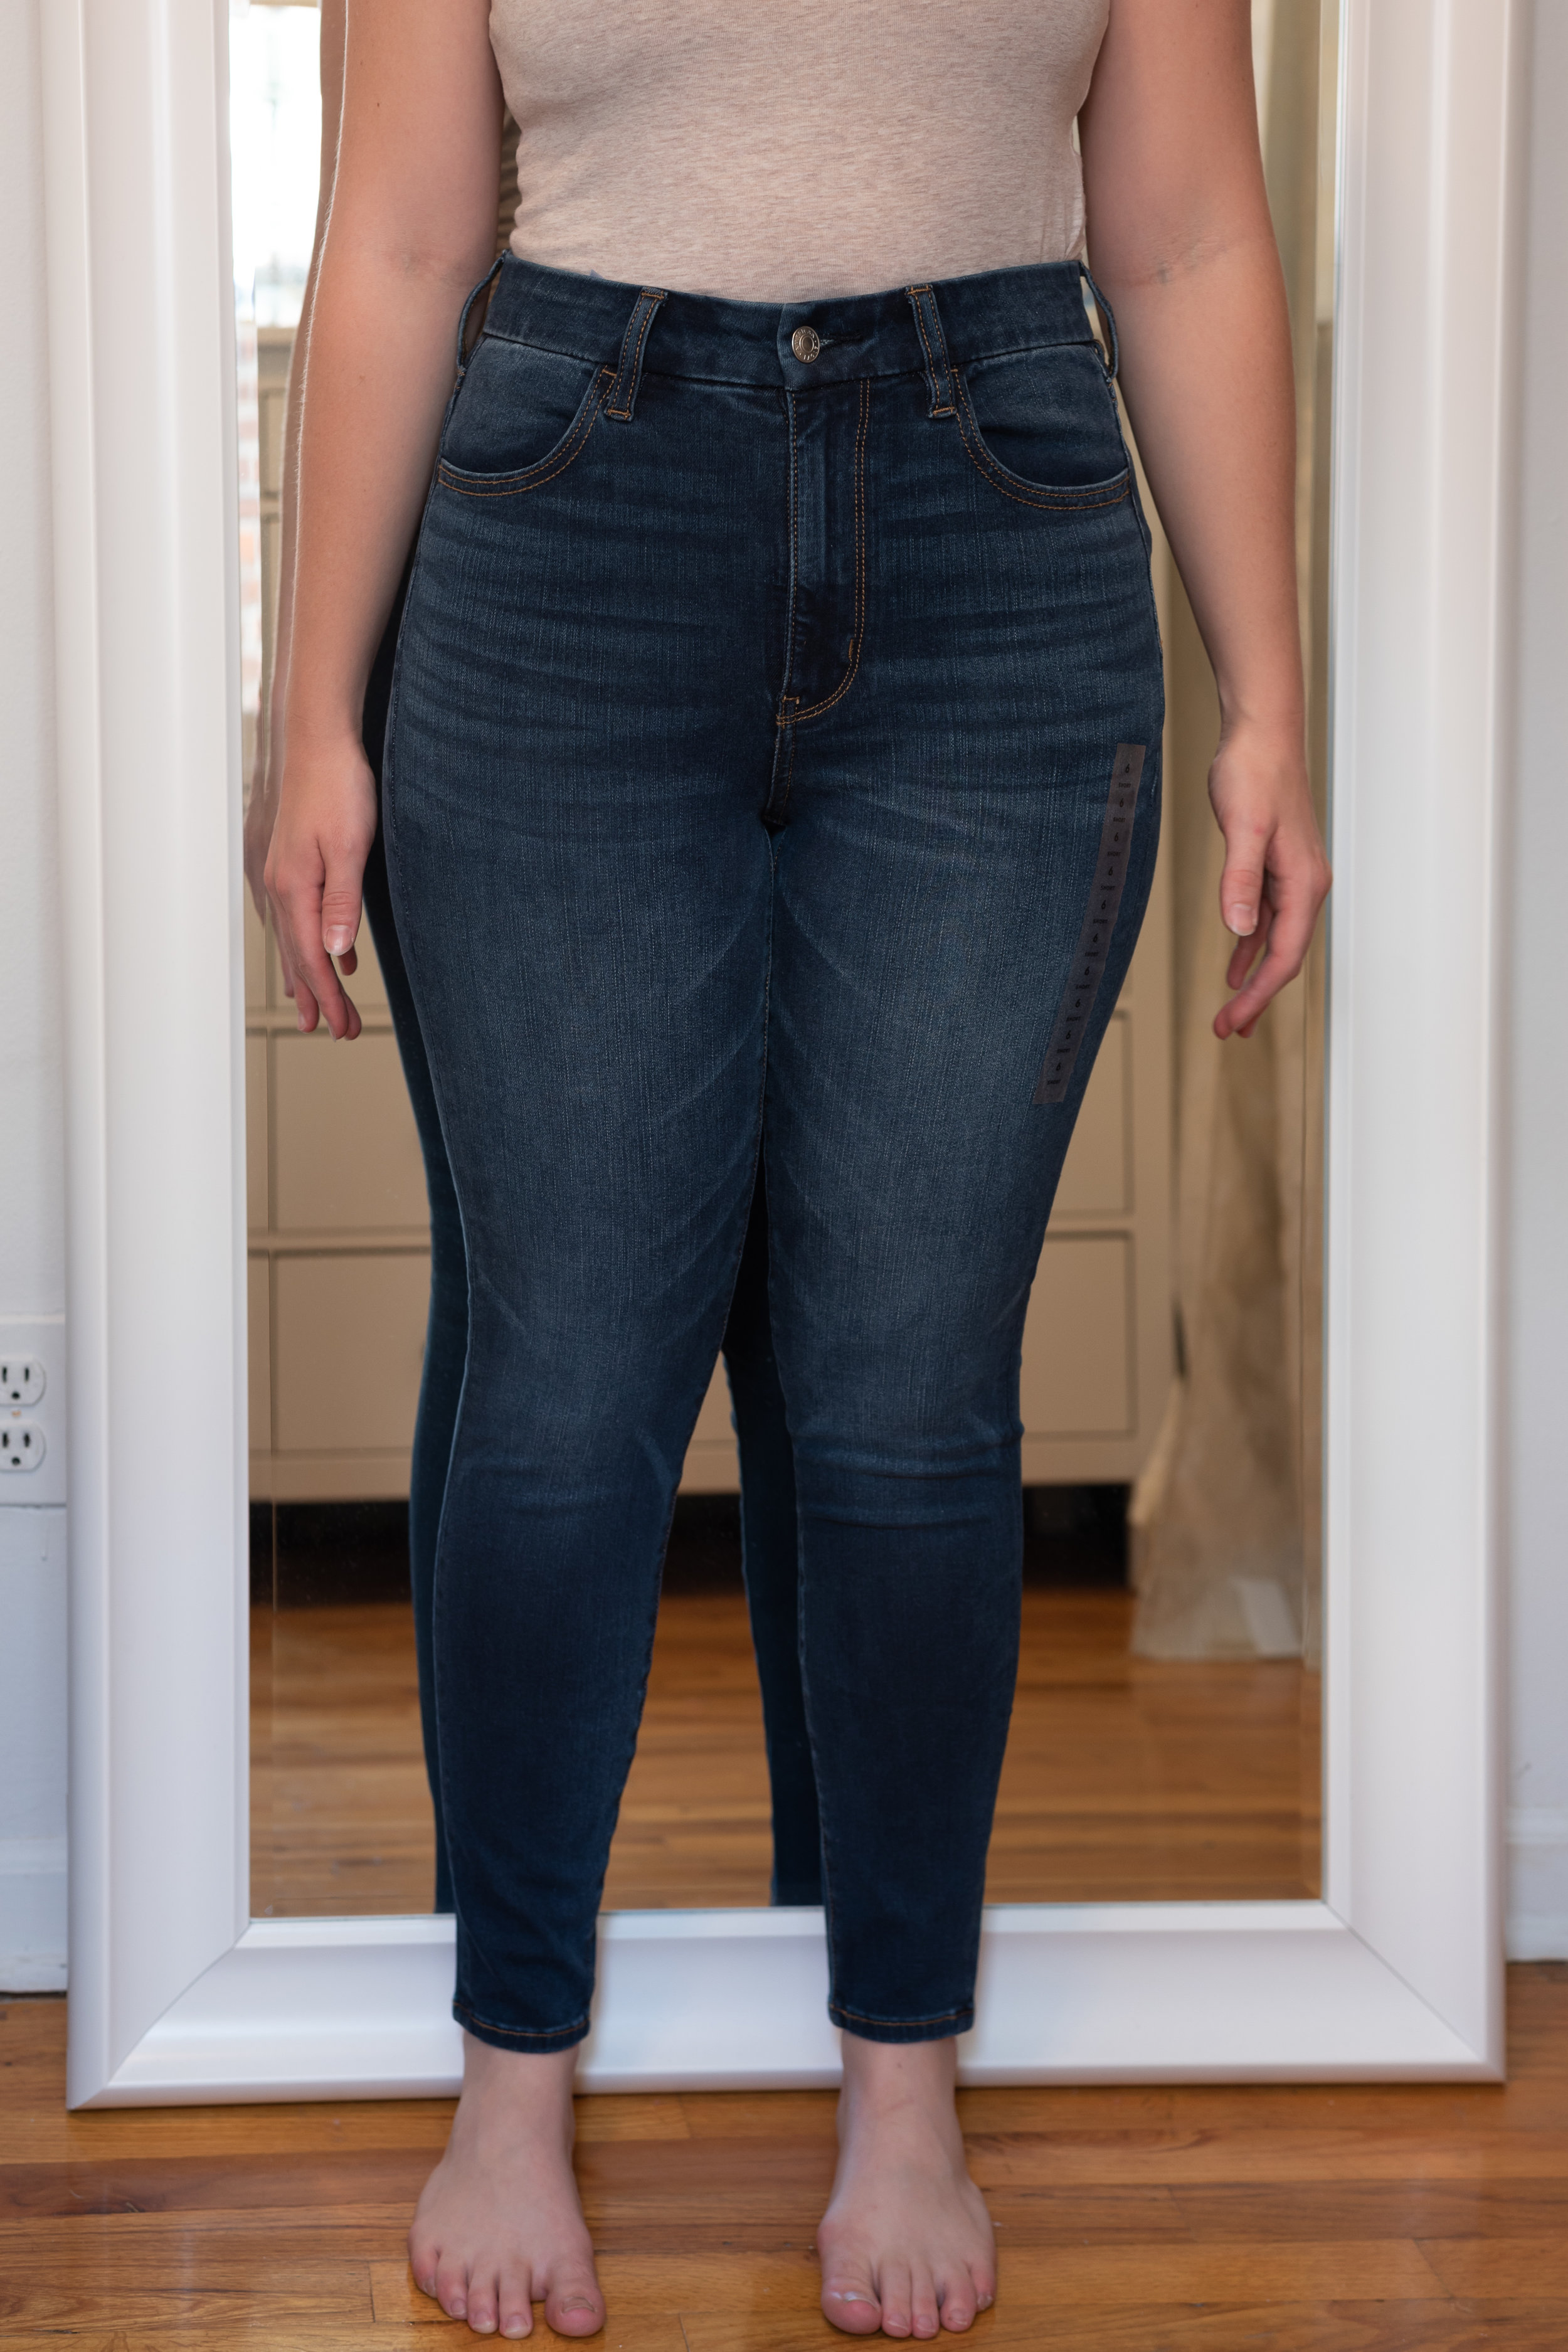 hollister jeggings review